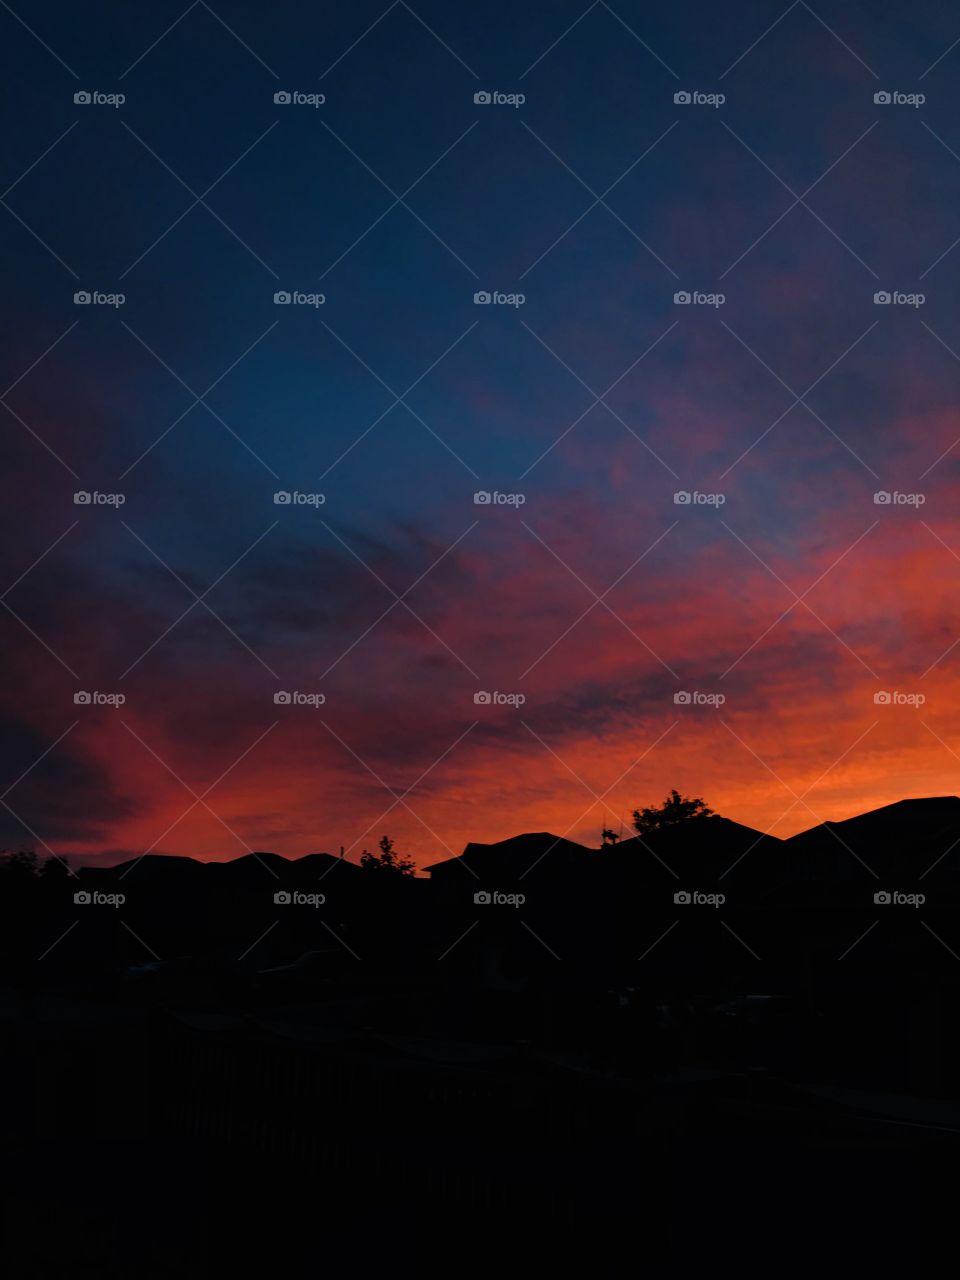 This is amazing 24 megapixel image of a contrast full sunset and token in canada this is a amazing photography sunset picture 